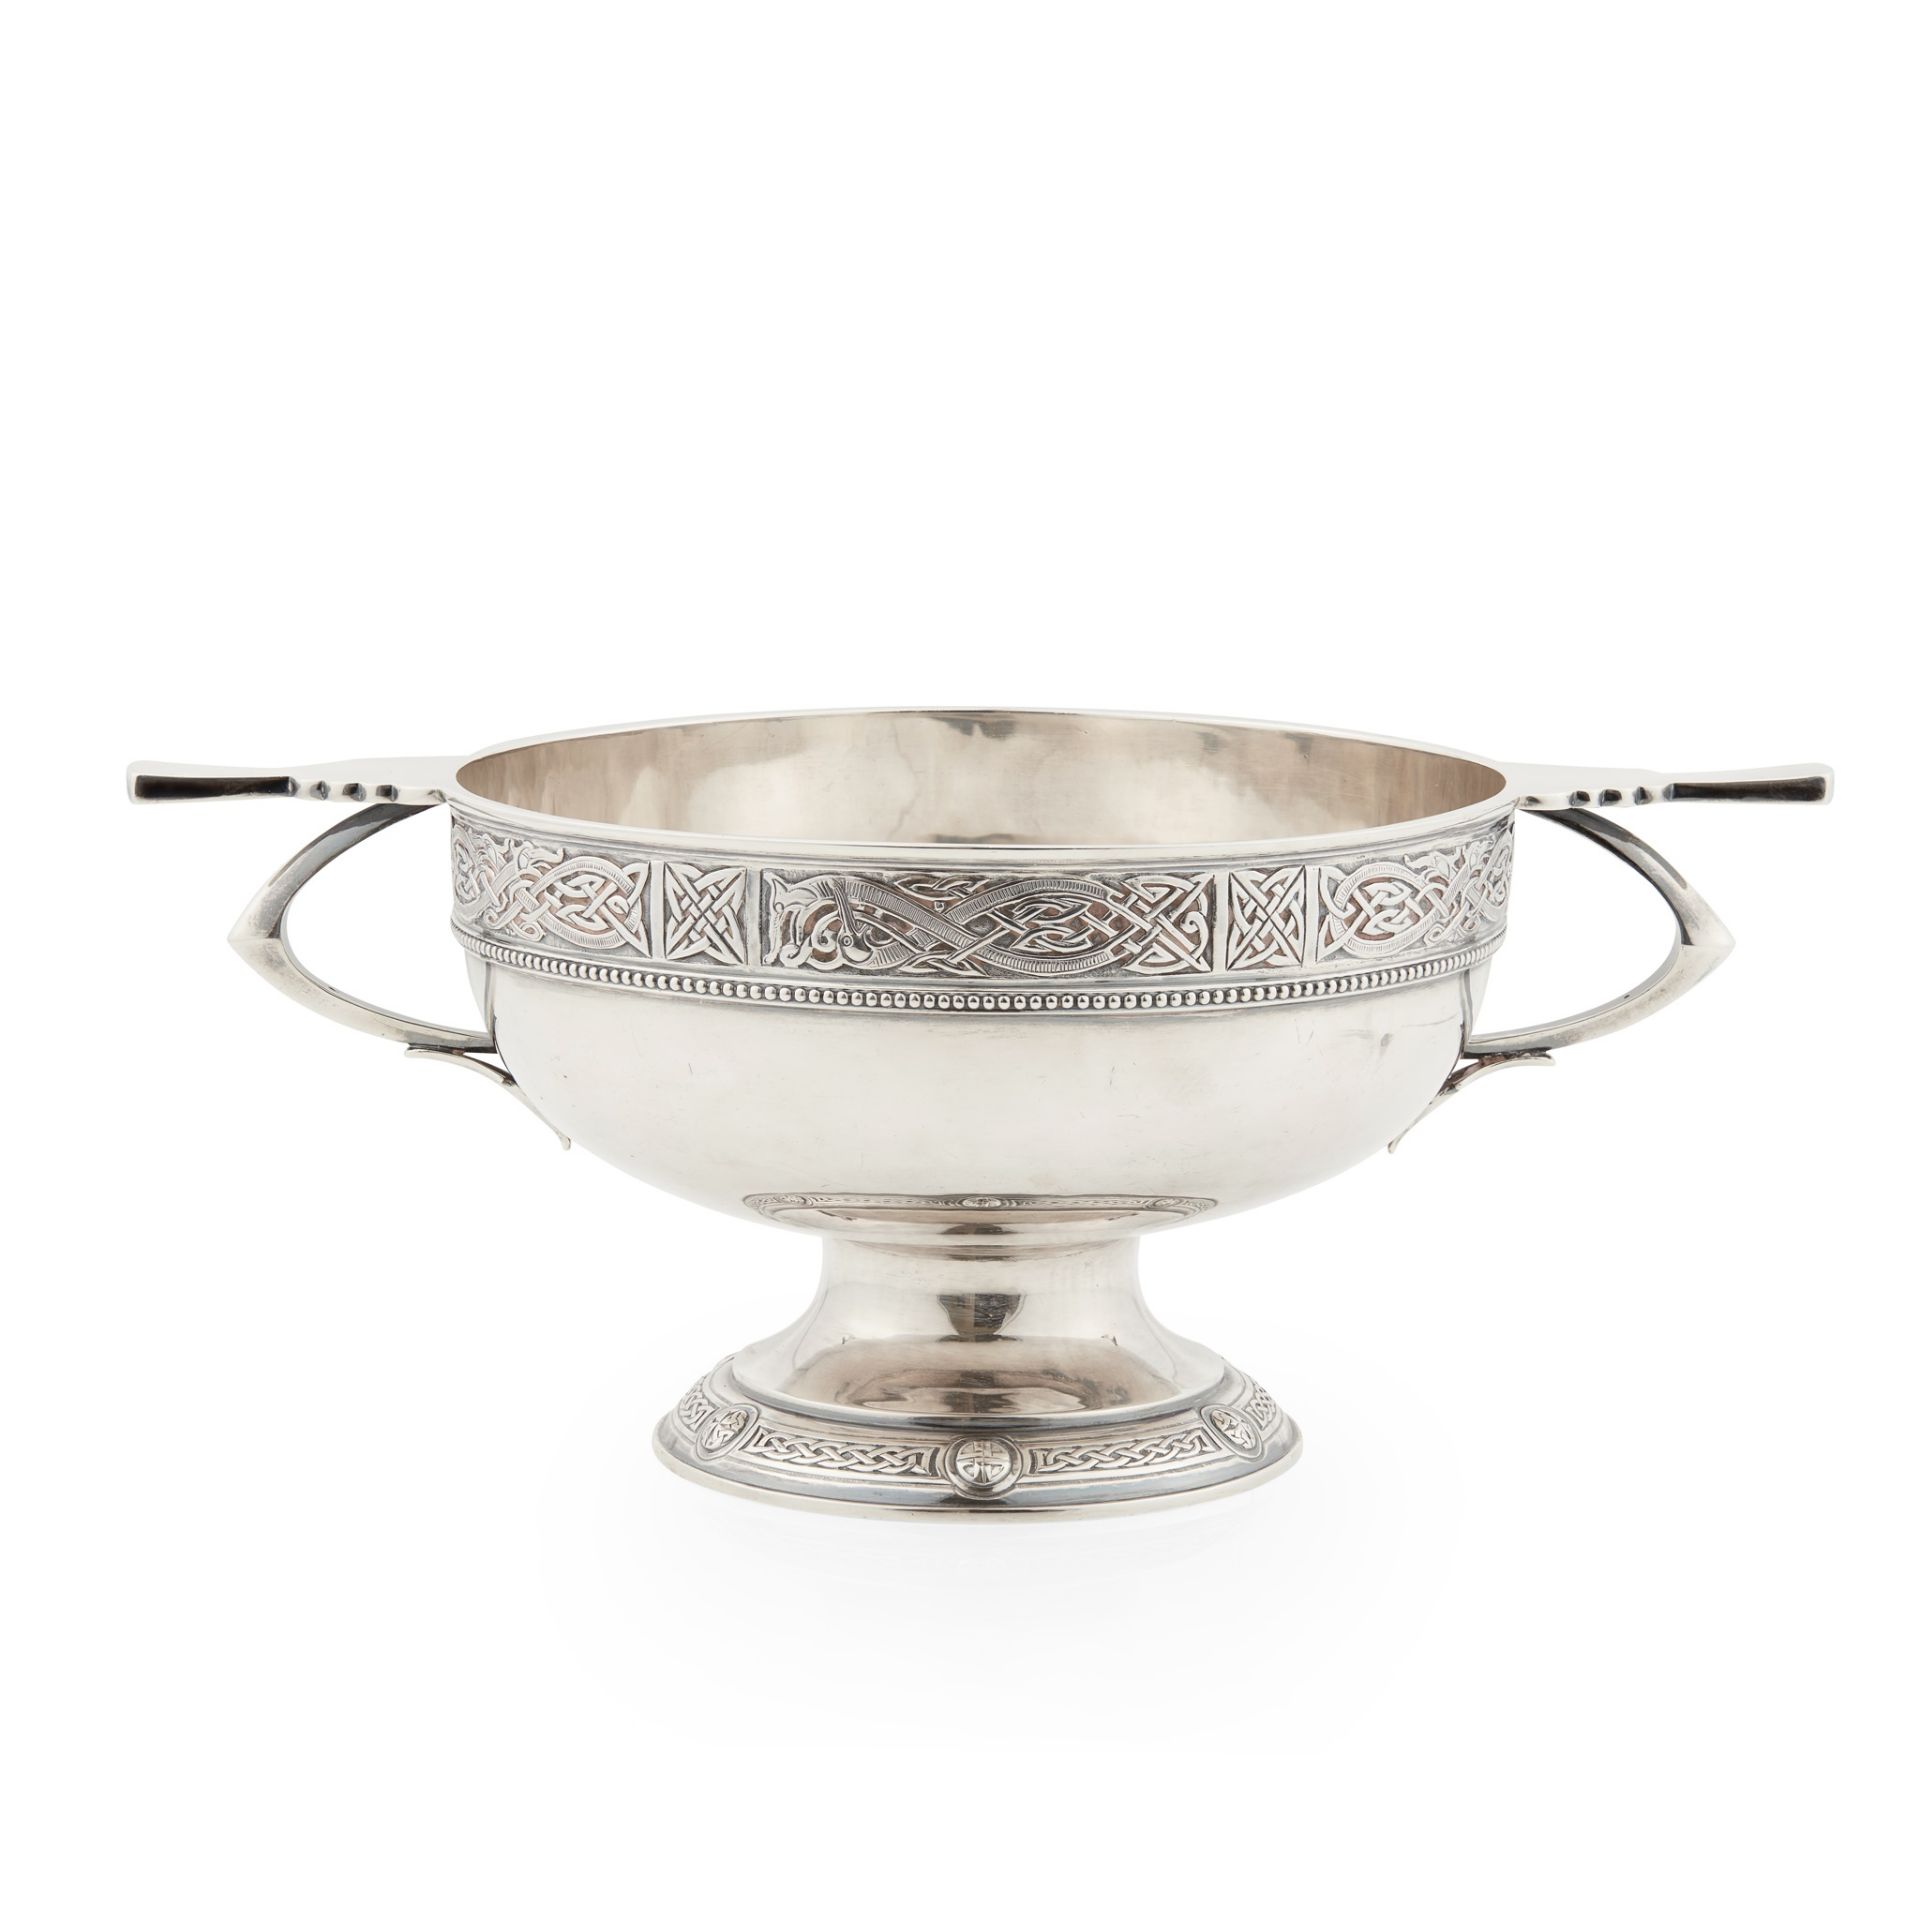 An early 20th Century twin handled rose bowl